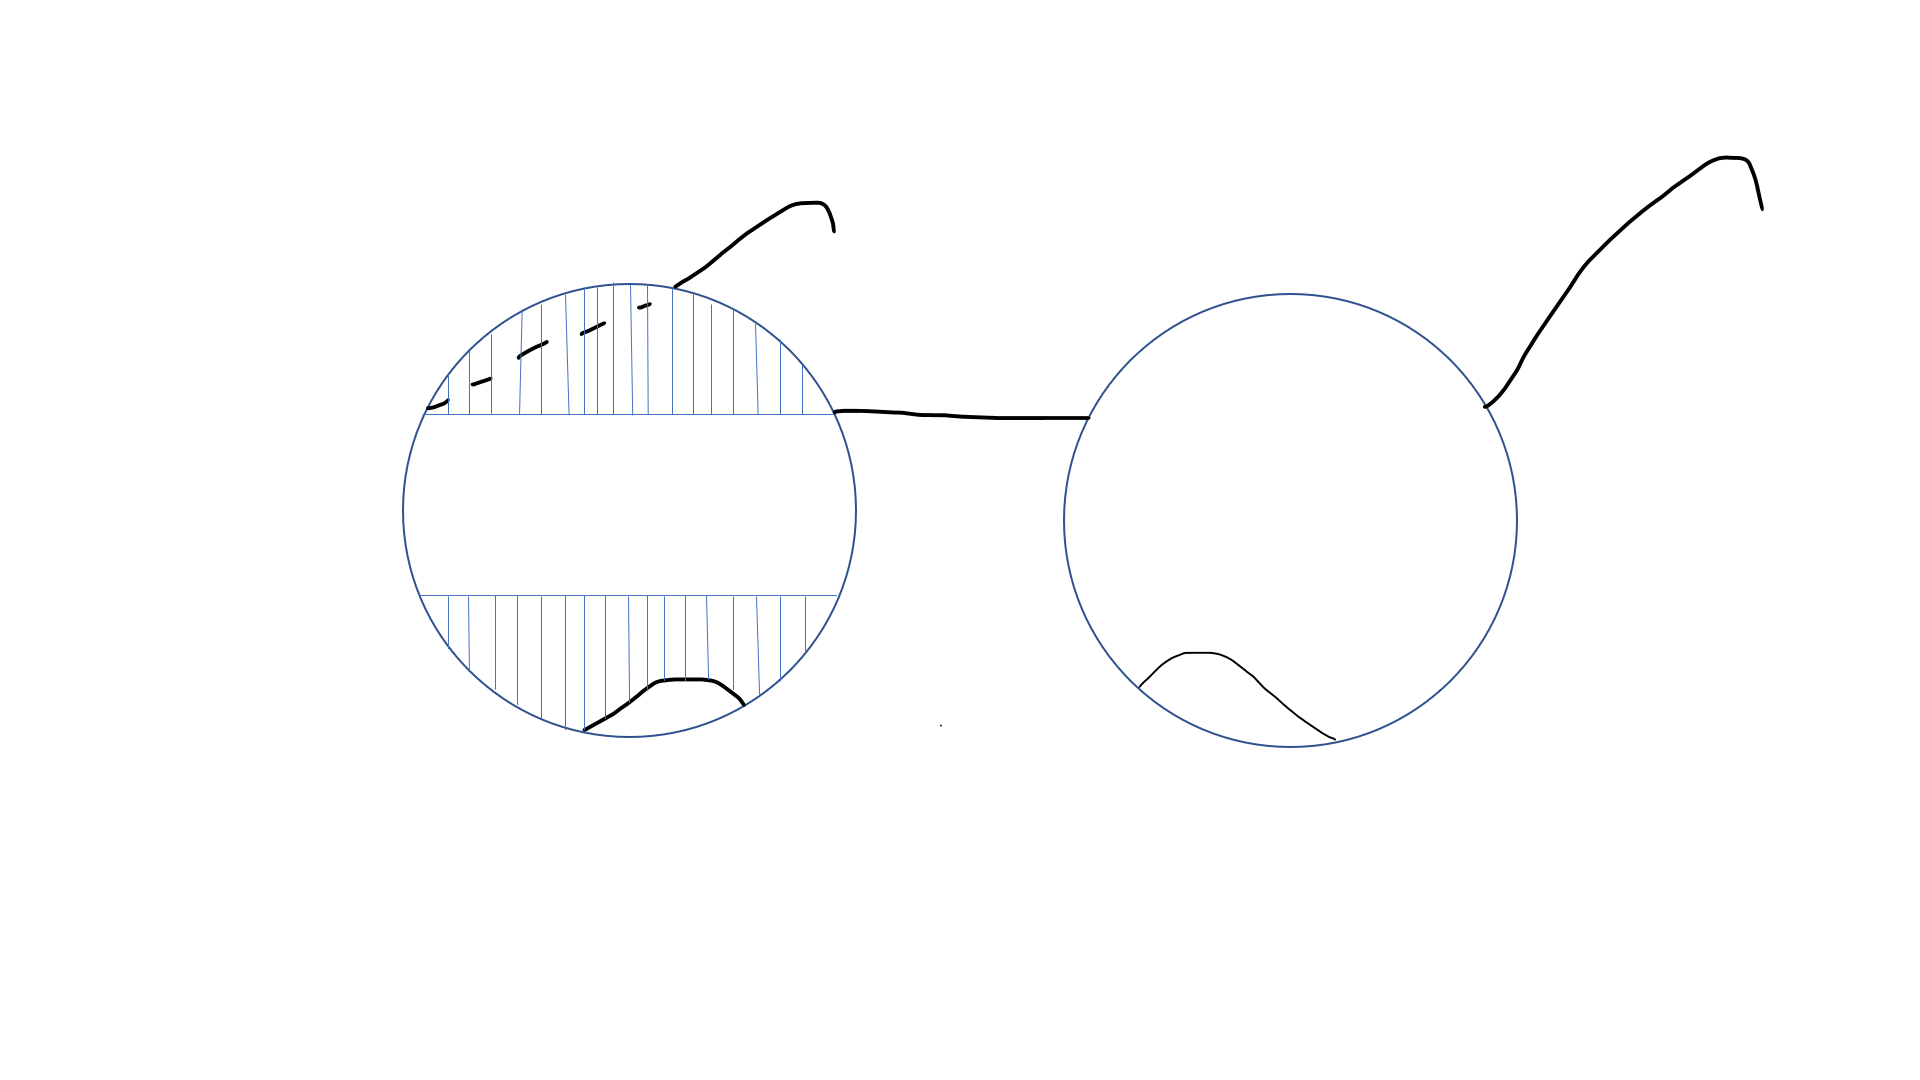 Peli prisms for right homonymous hemianopia (schematic diagram, for users of bifocal lenses)